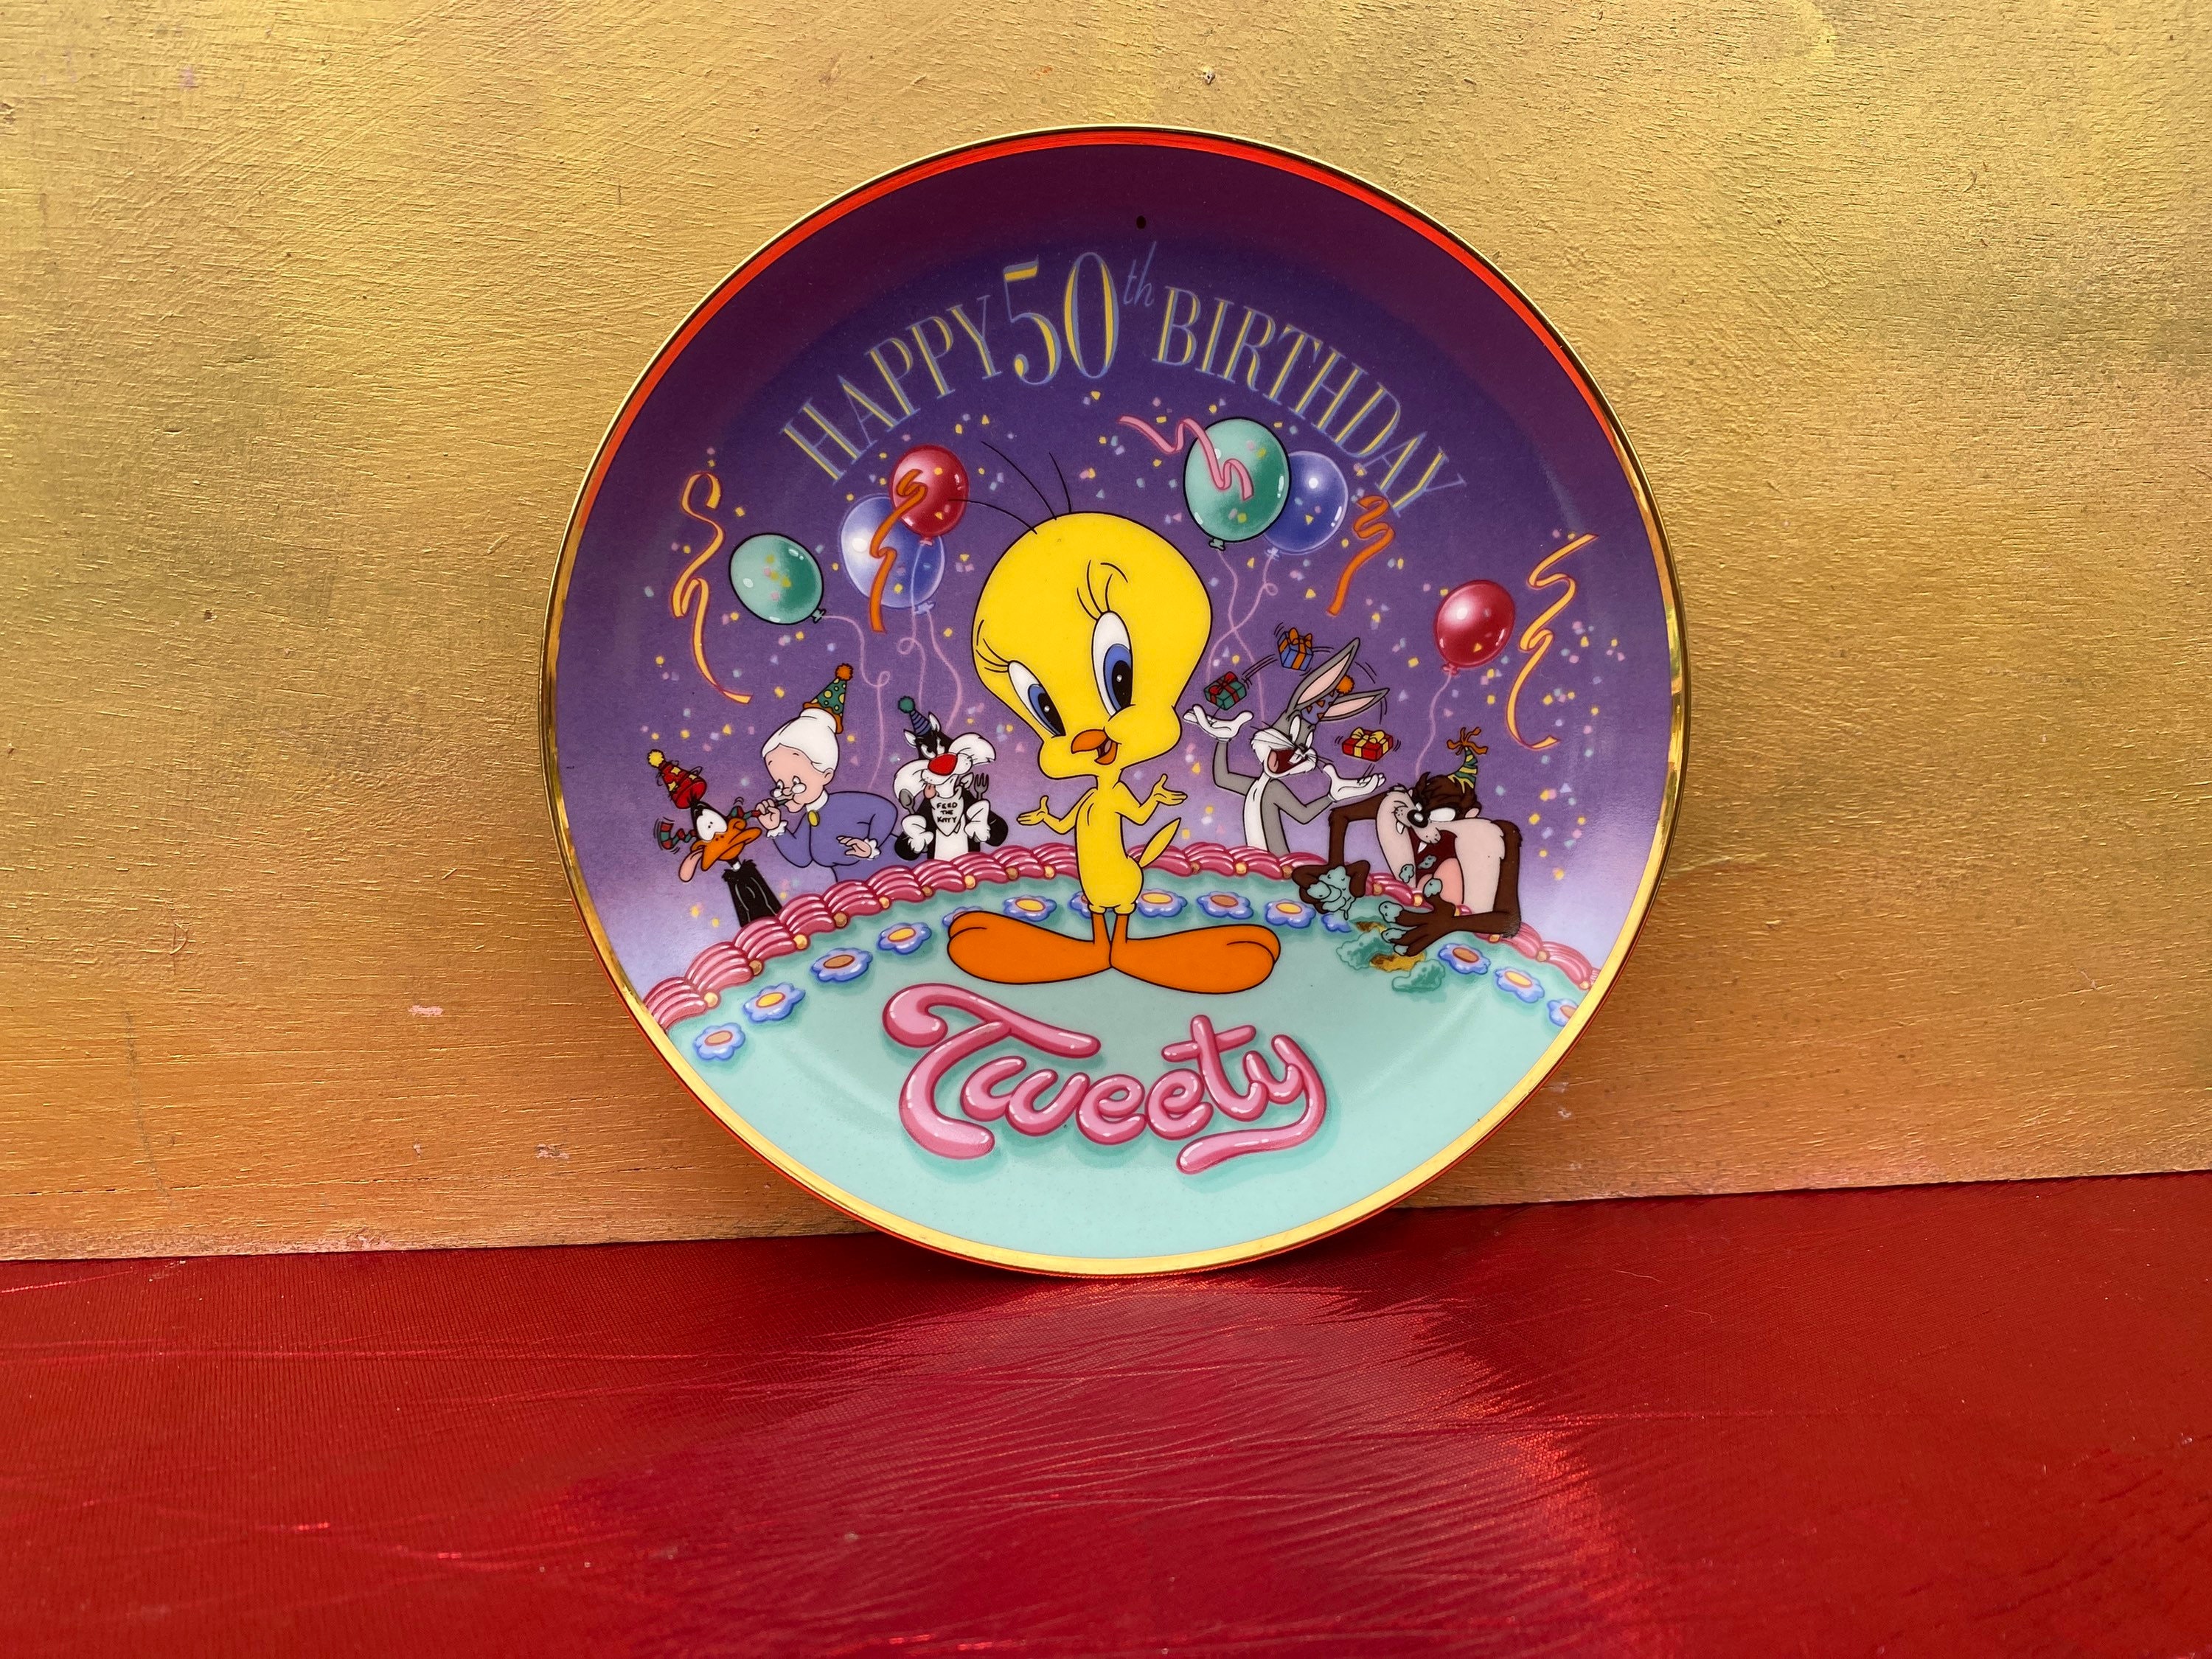 1993 Happy 50th Birthday Tweety,Franklin Mint,Looney Tunes Plate Collection,Collectors Plate,Decorative Plate,Porcelain Plate,Rare Plate